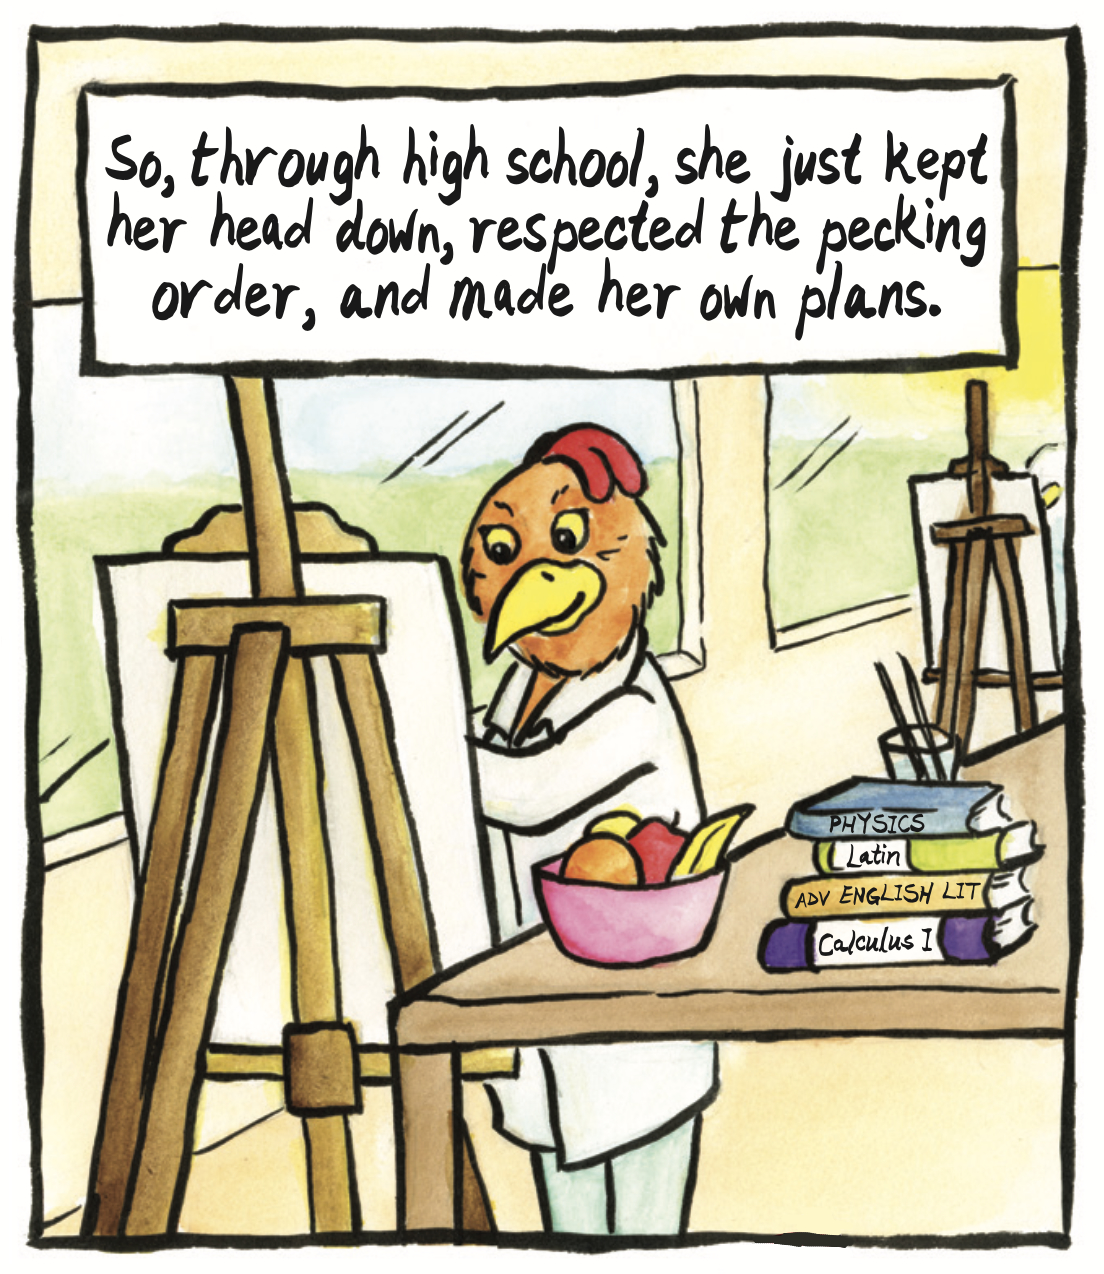 â€œSo, through high school, she just kept her head down, respected the pecking order, and made her own plans.â€ The red hen smiles as she paints at a canvas next to a stack of textbooks.